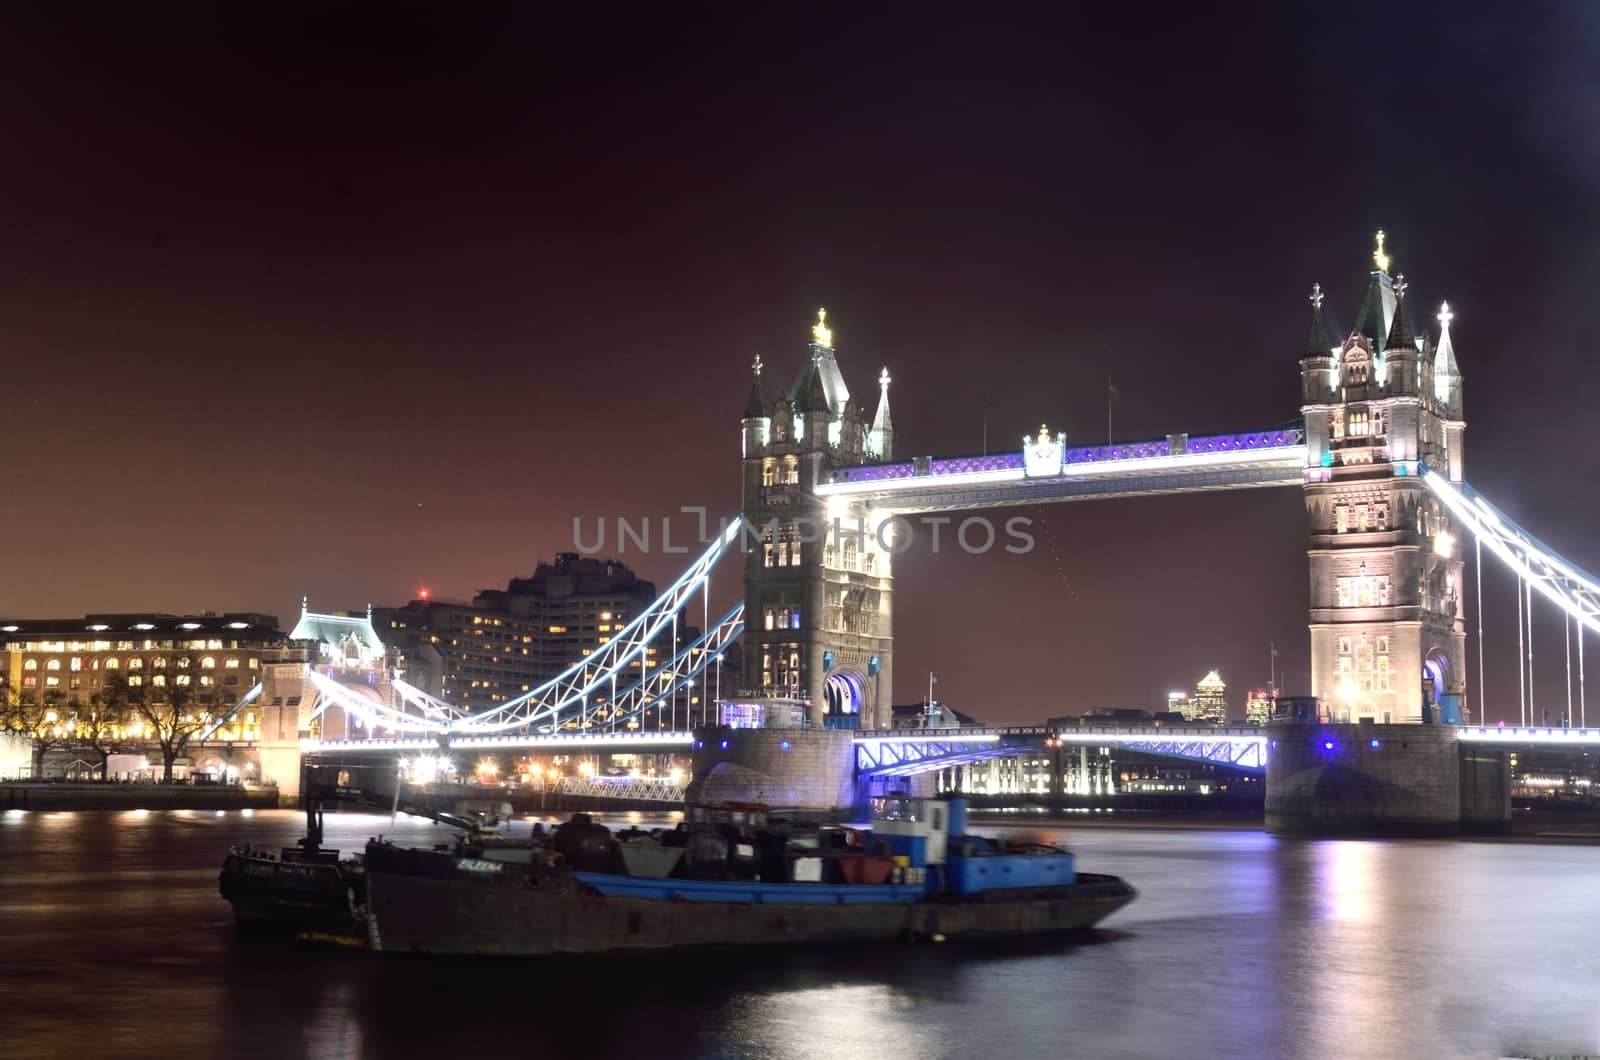 Tower Bridge by night with Boat in foreground